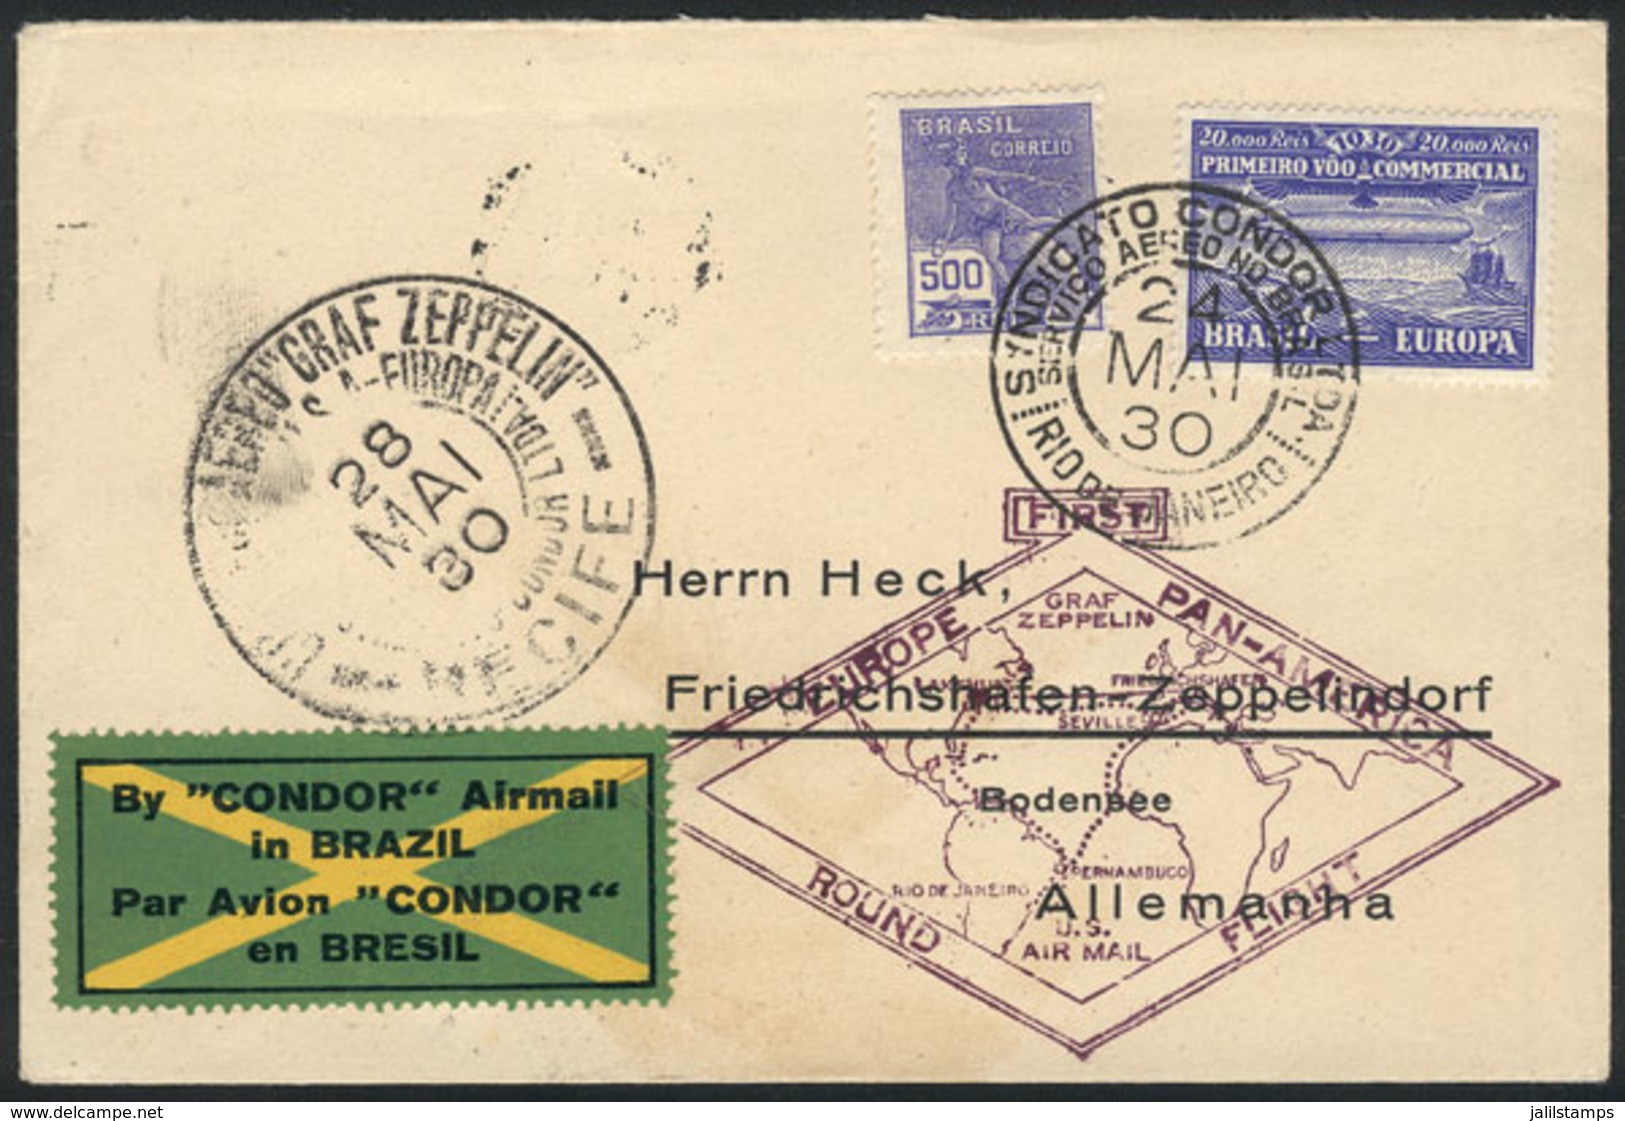 BRAZIL: 24/MAY/1930 Rio De Janeiro - Friedrichshafen, Via ZEPPELIN: Cover Franked By Sc.4CL3 + 500Rs. Definitive, Specia - Other & Unclassified